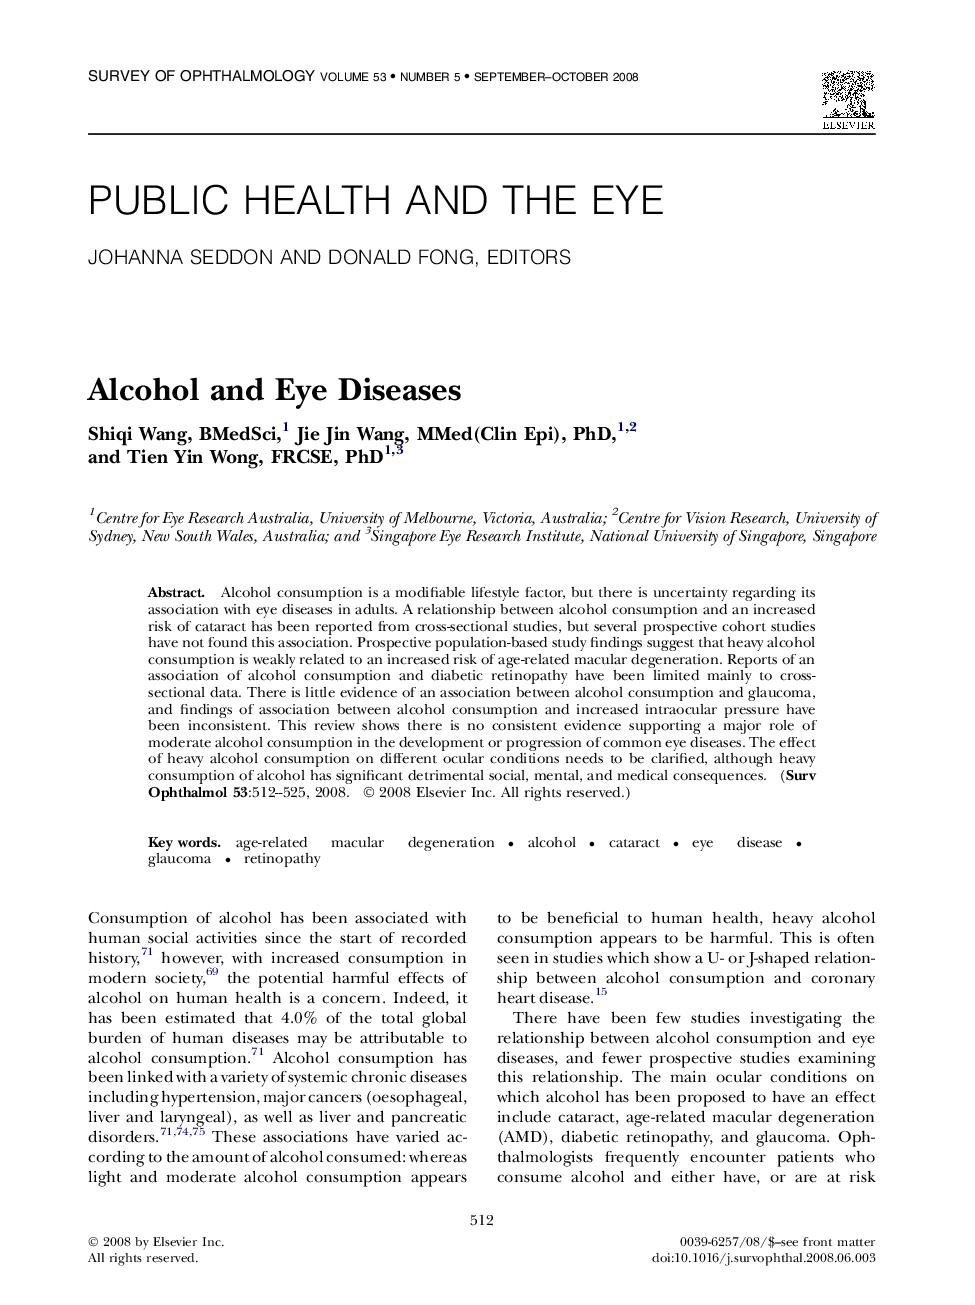 Alcohol and Eye Diseases 